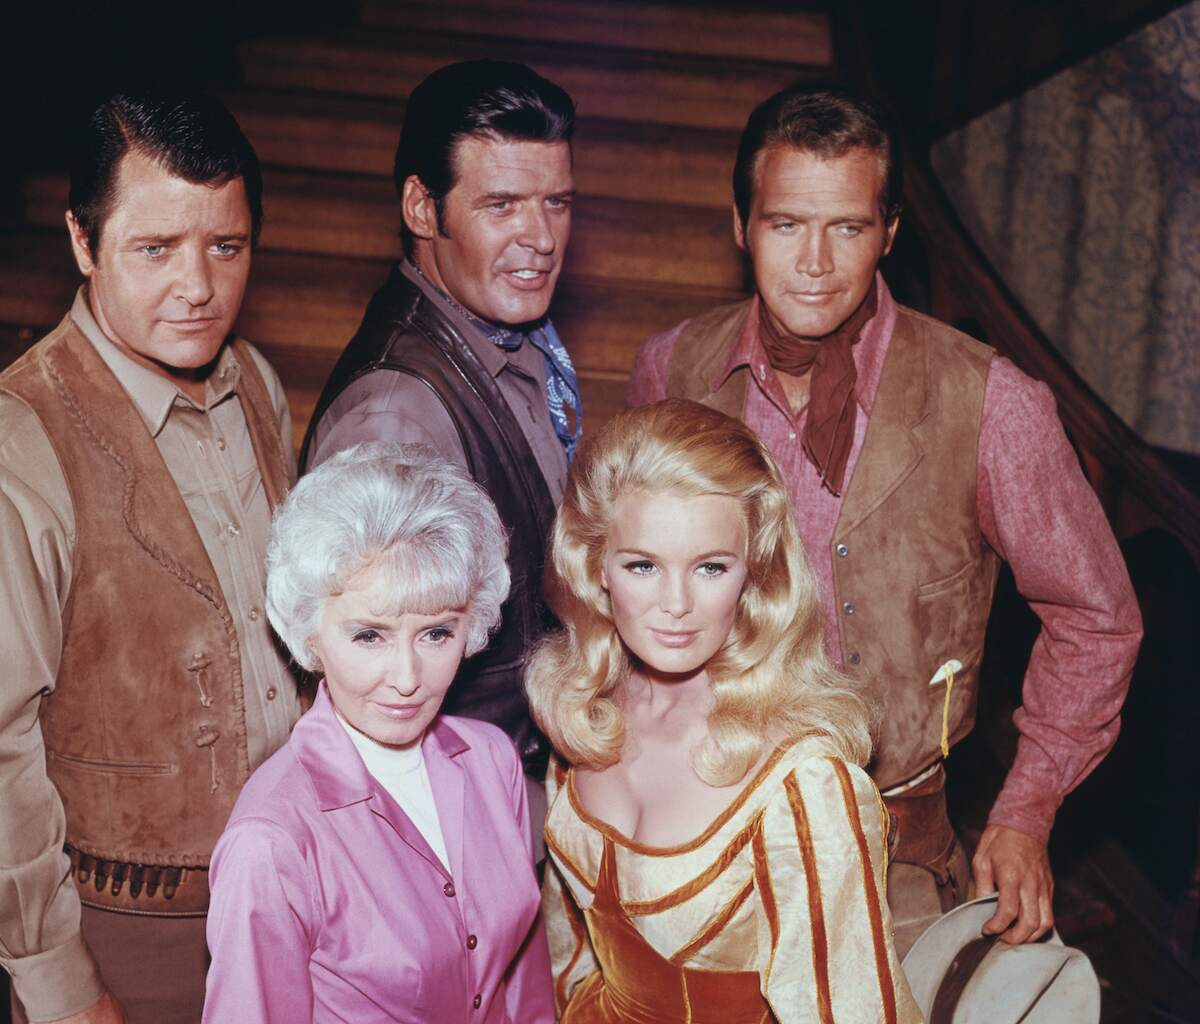 The Big Valley cast